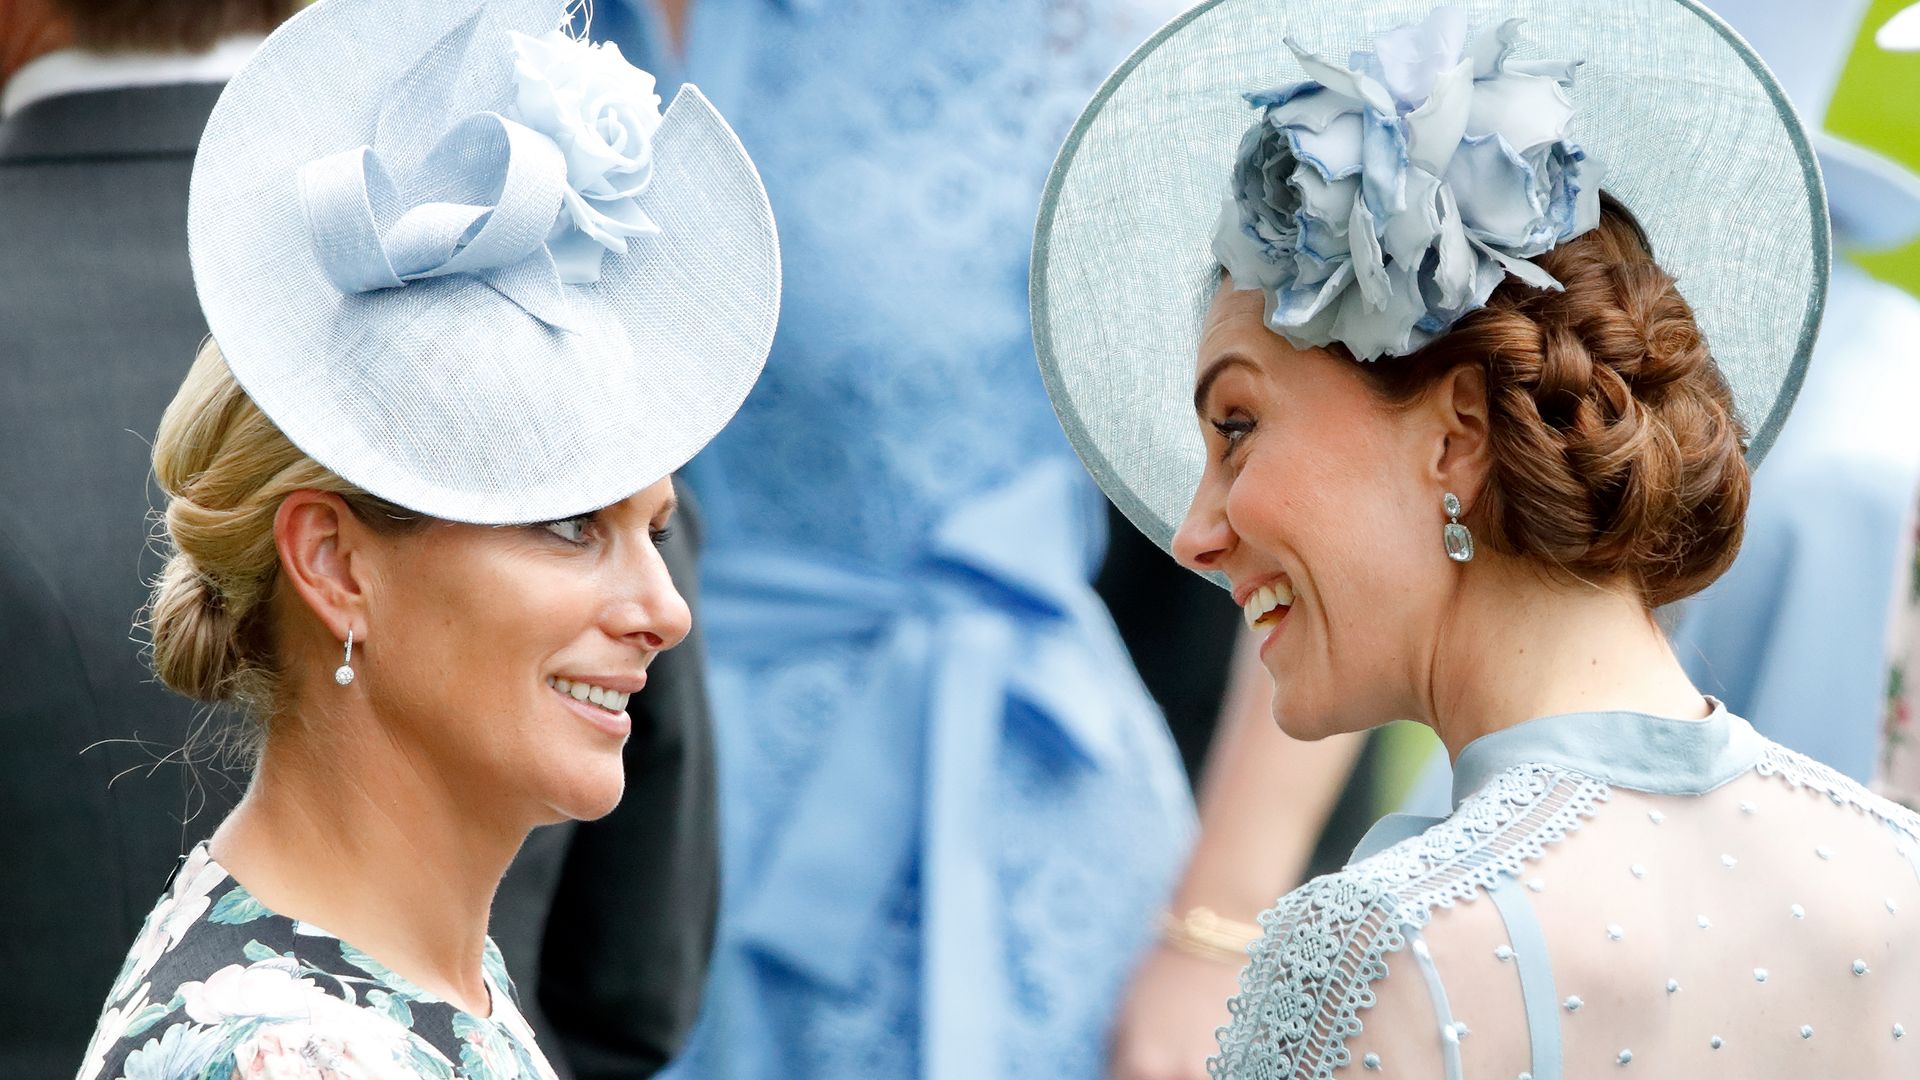 Zara Tindall and Catherine, Princess of Wales, attend day one of Royal Ascot at Ascot Racecourse on June 18, 2019 in Ascot, England.